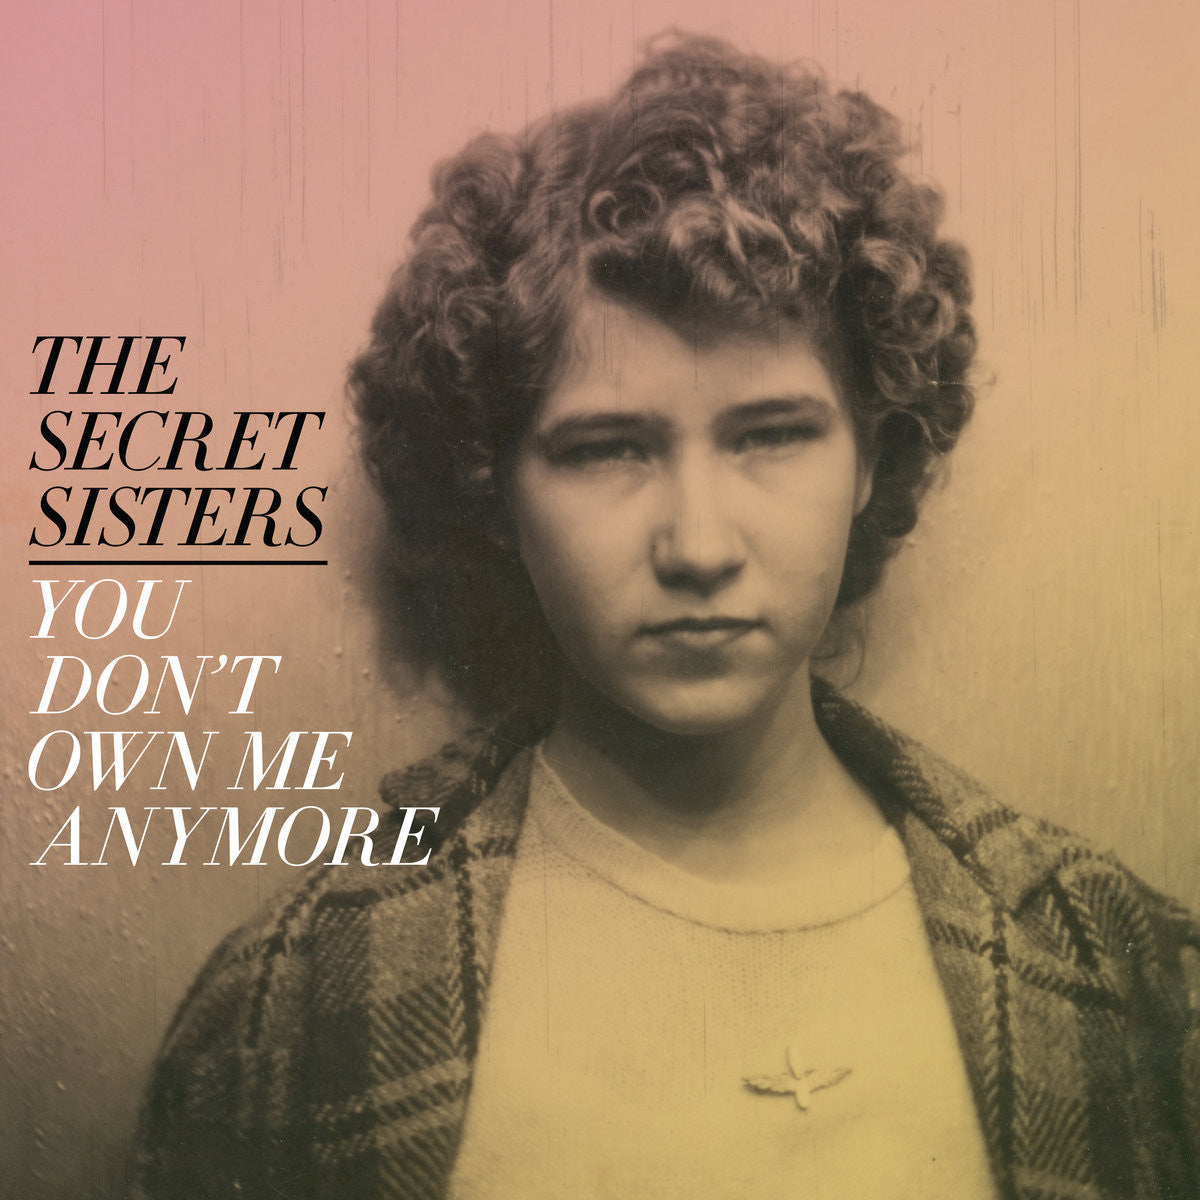 The Secret Sisters - You Don't Own Me Anymore - New Vinyl Record 2017 New West 150Gram Pressing (Produced by Brandi Carlile) with Download - Country / Folk Rock